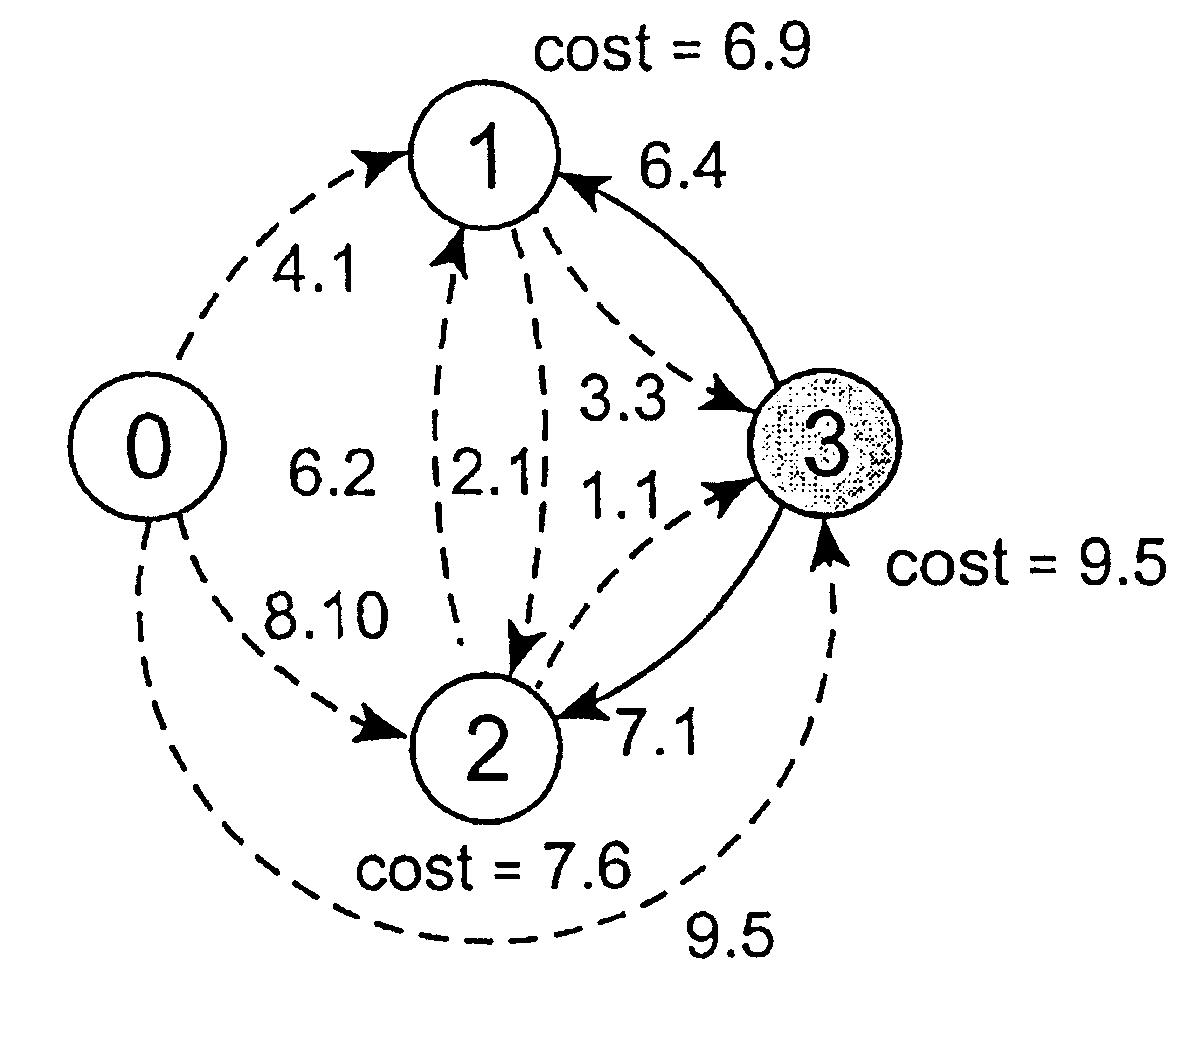 Costs in data networks